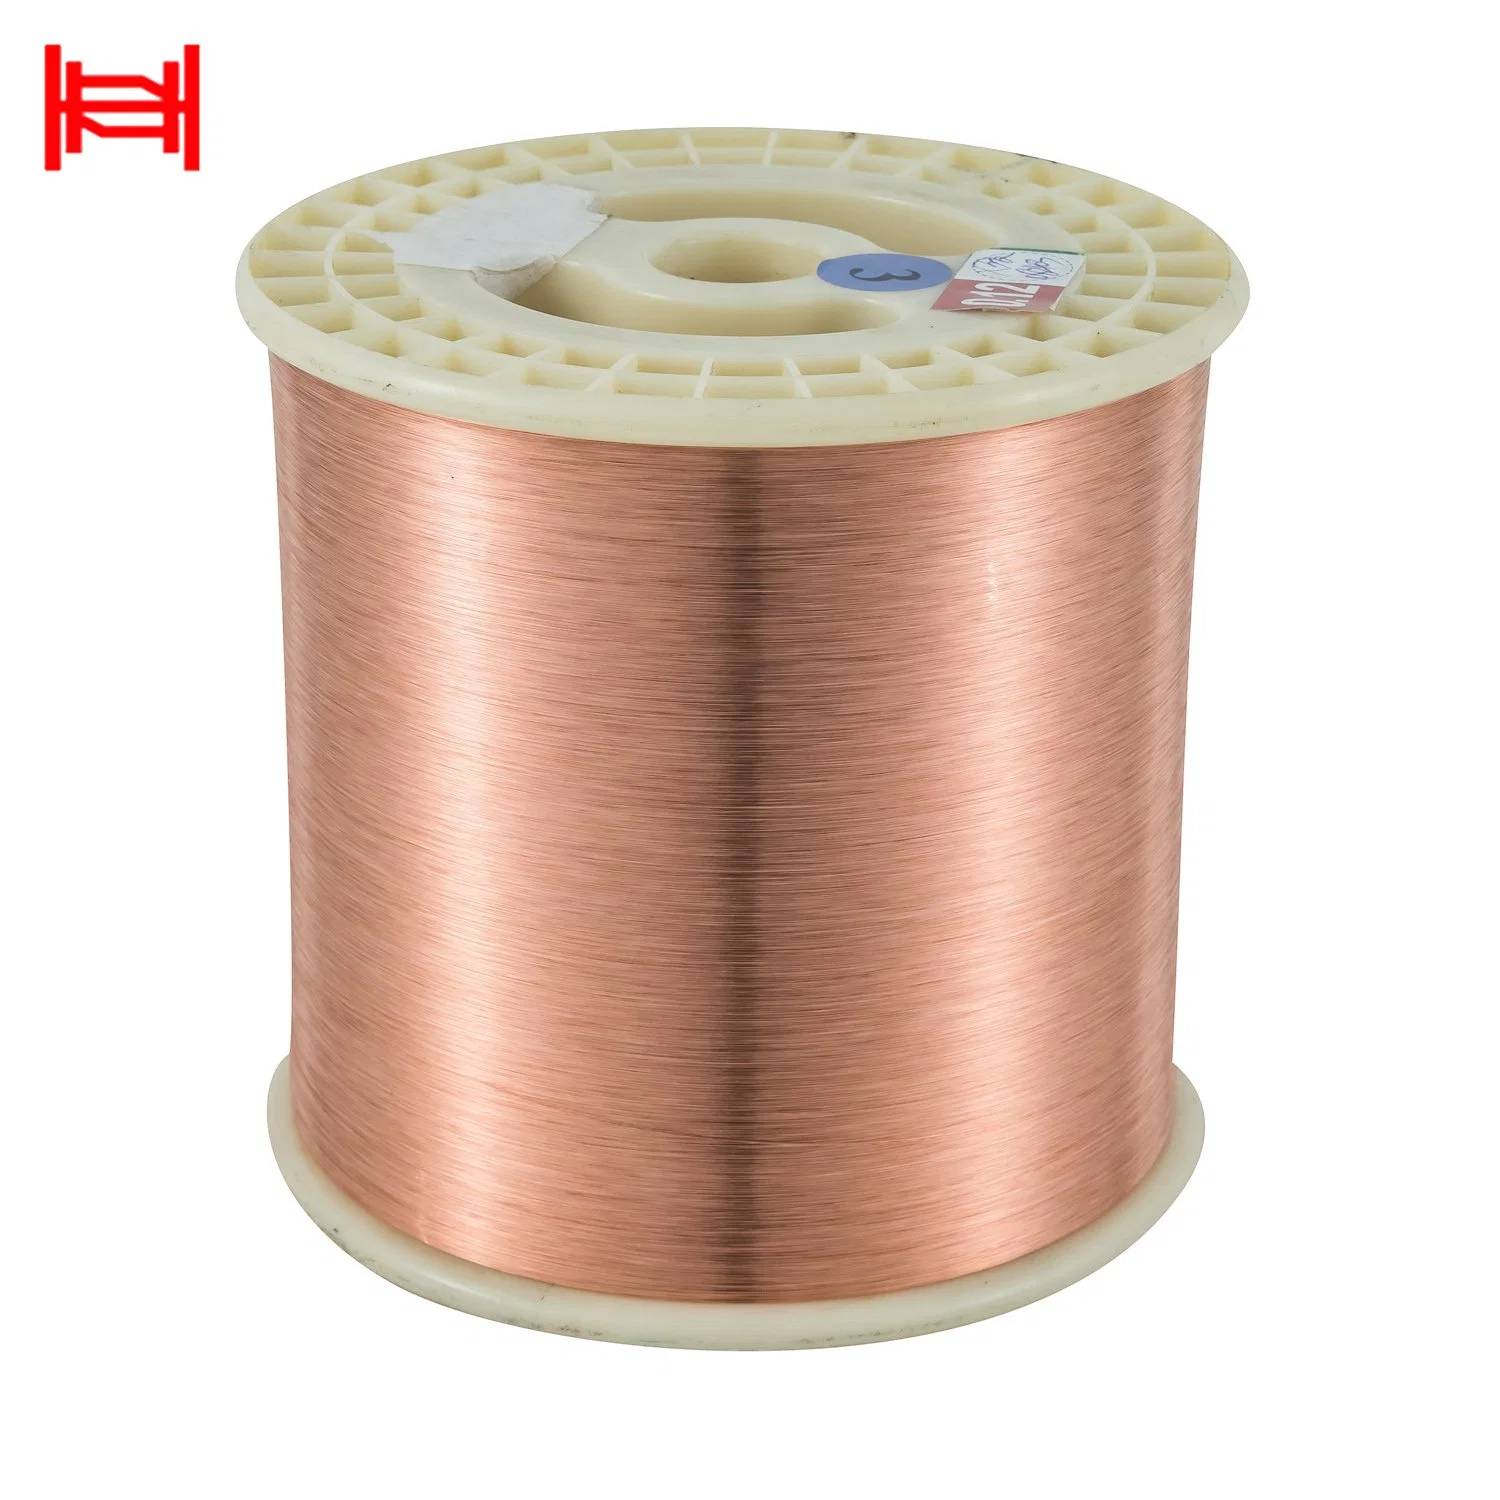 ASTM C51900 Phosphor Bronze Tin-Copper Alloy Electrical Connector Wires